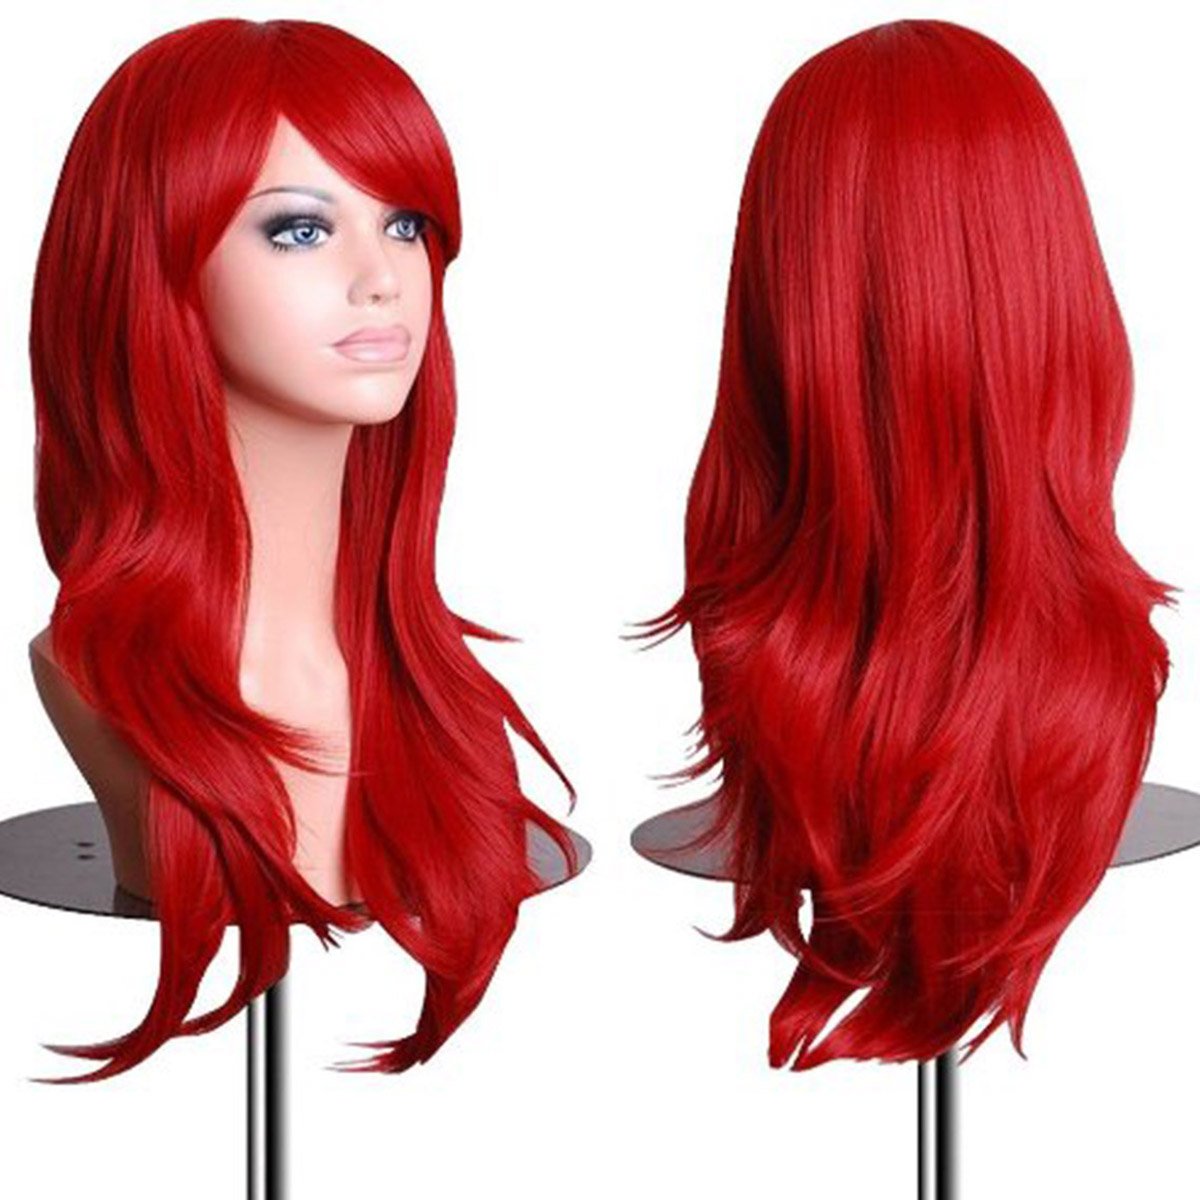 Price:$9.99     XVbond Women's Wig 28" Fluffy Curly Wavy Hair Wigs for Girl Heat Friendly Synthetic Cosplay Halloween Party Wigs with Wig Cap (Red)   Beauty